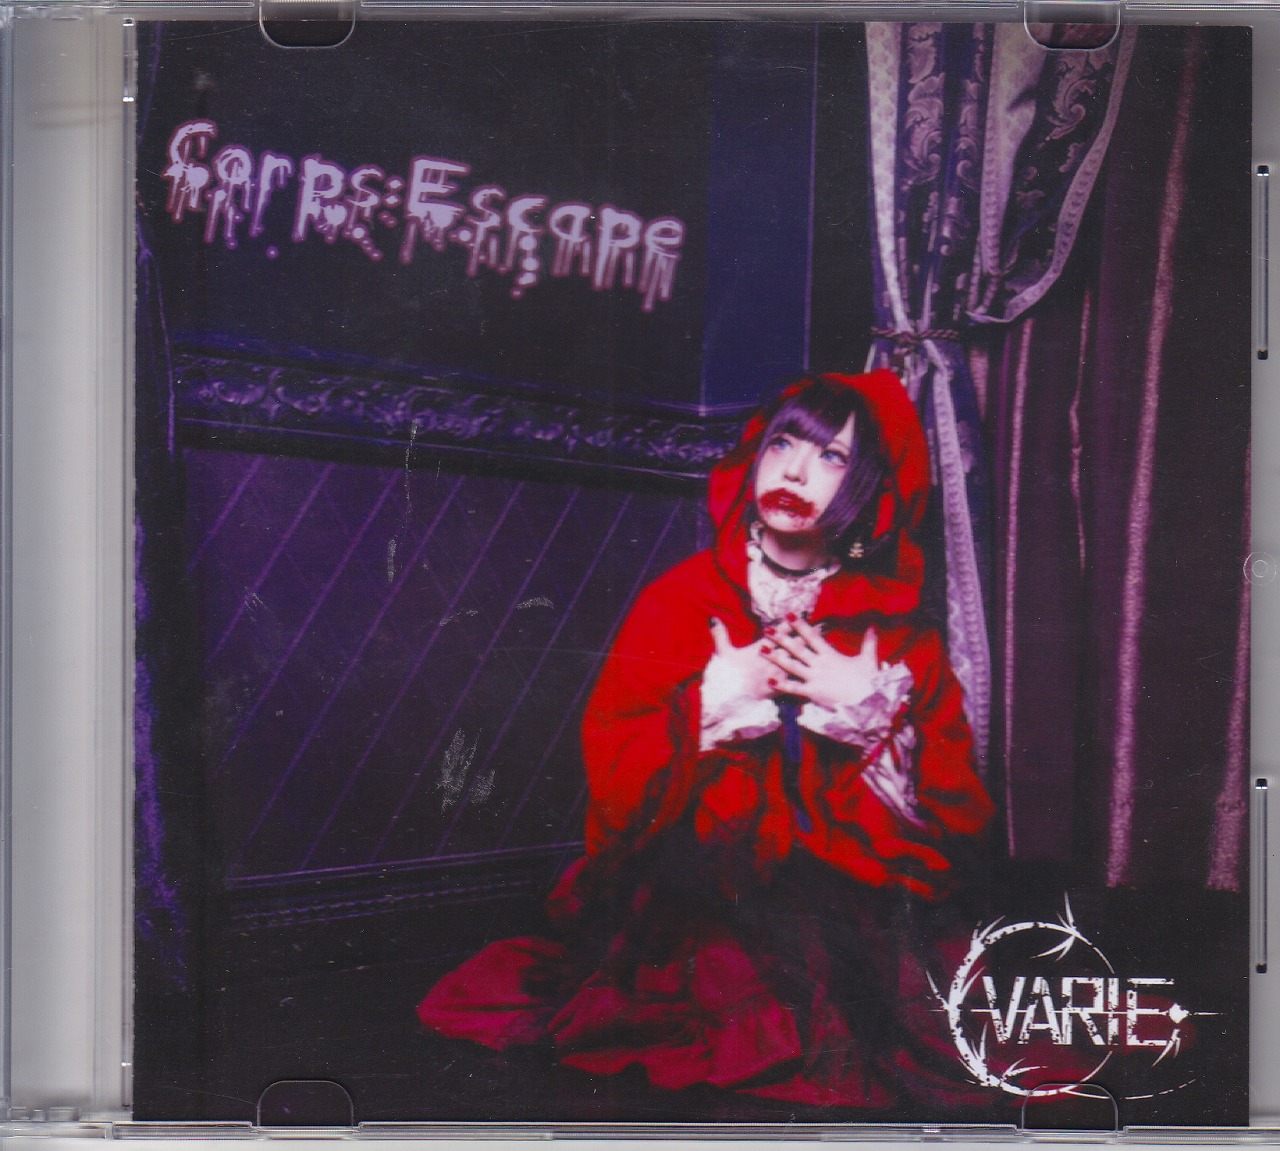 VARIE ( ヴァリエ )  の CD Corps:Escape